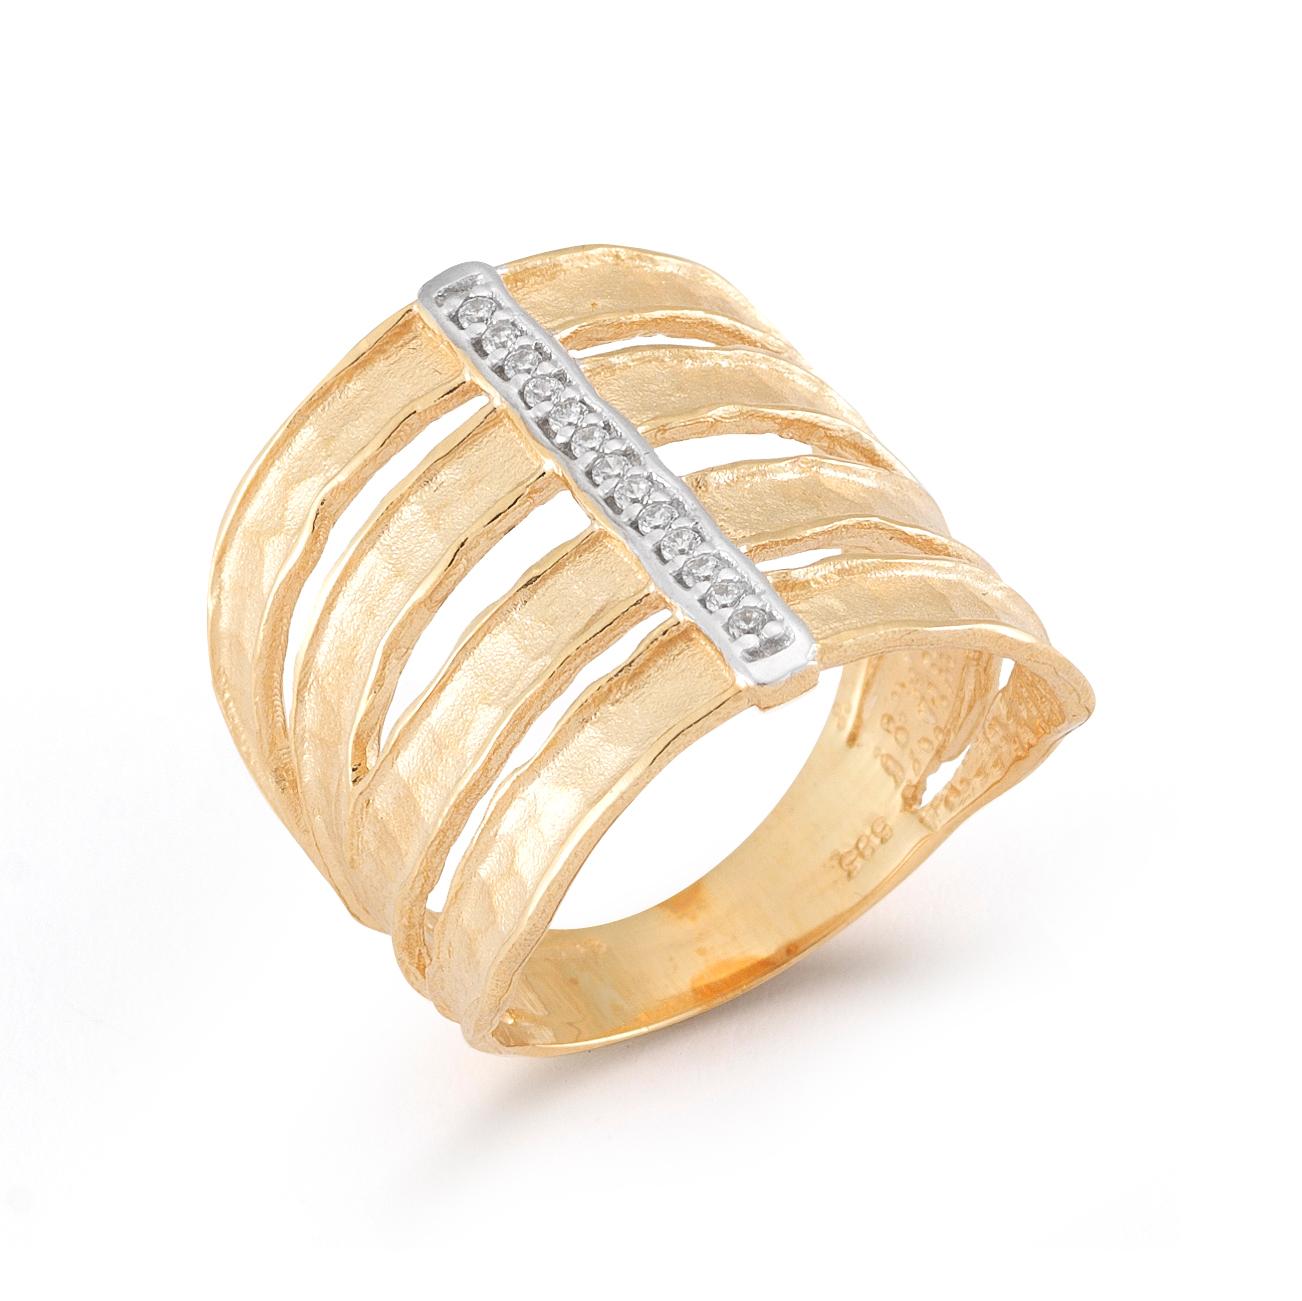 14 Karat Yellow Gold Hand-Crafted Matte and Hammer-Finished Scallop-Edged Cut-Out Ring, Accented with 0.08 Carat of Pave Set Diamonds.
